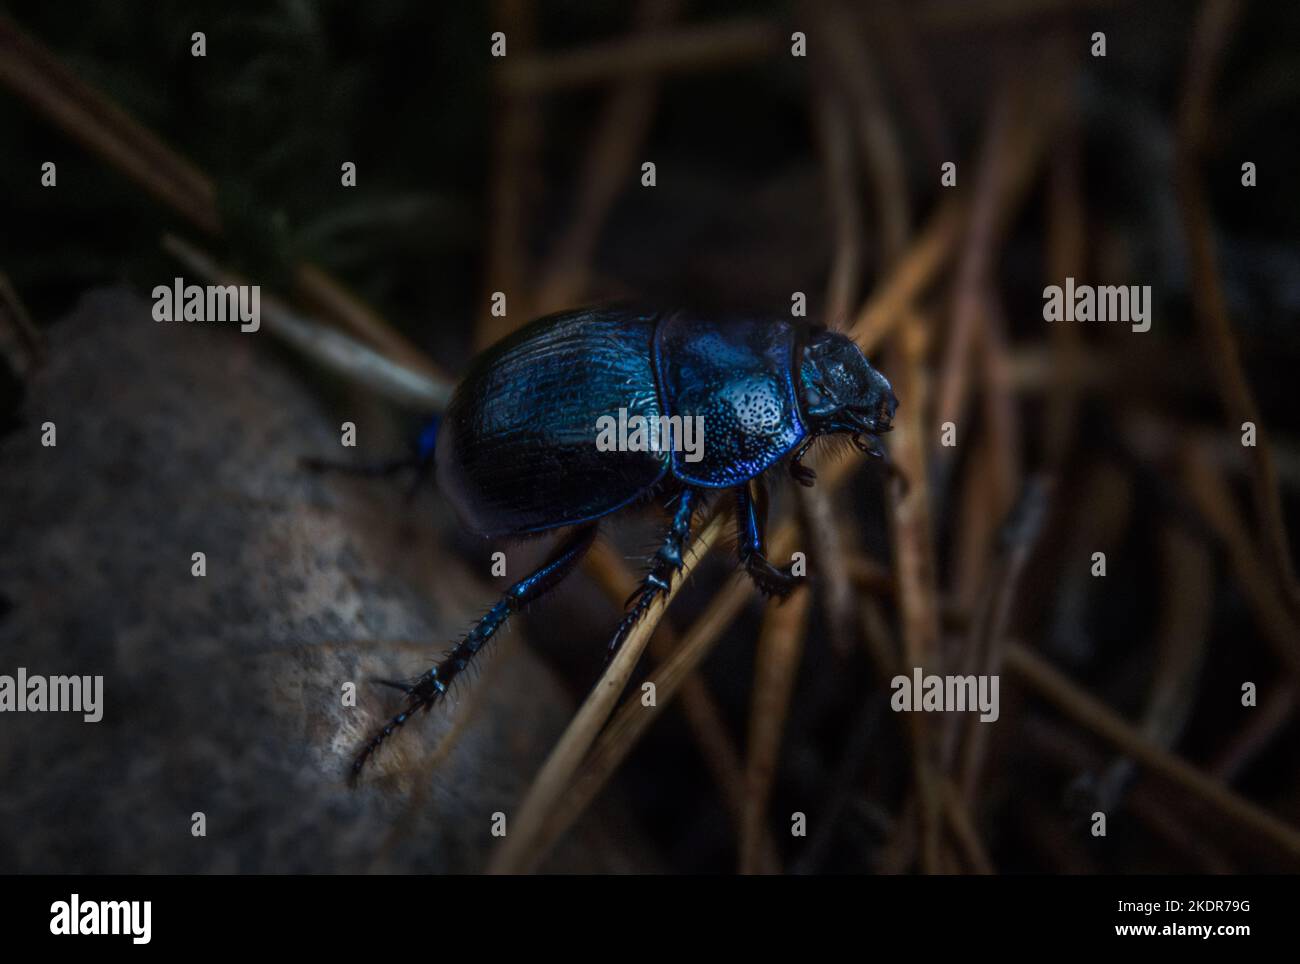 blue beetle in the forest close-up. macro world Stock Photo